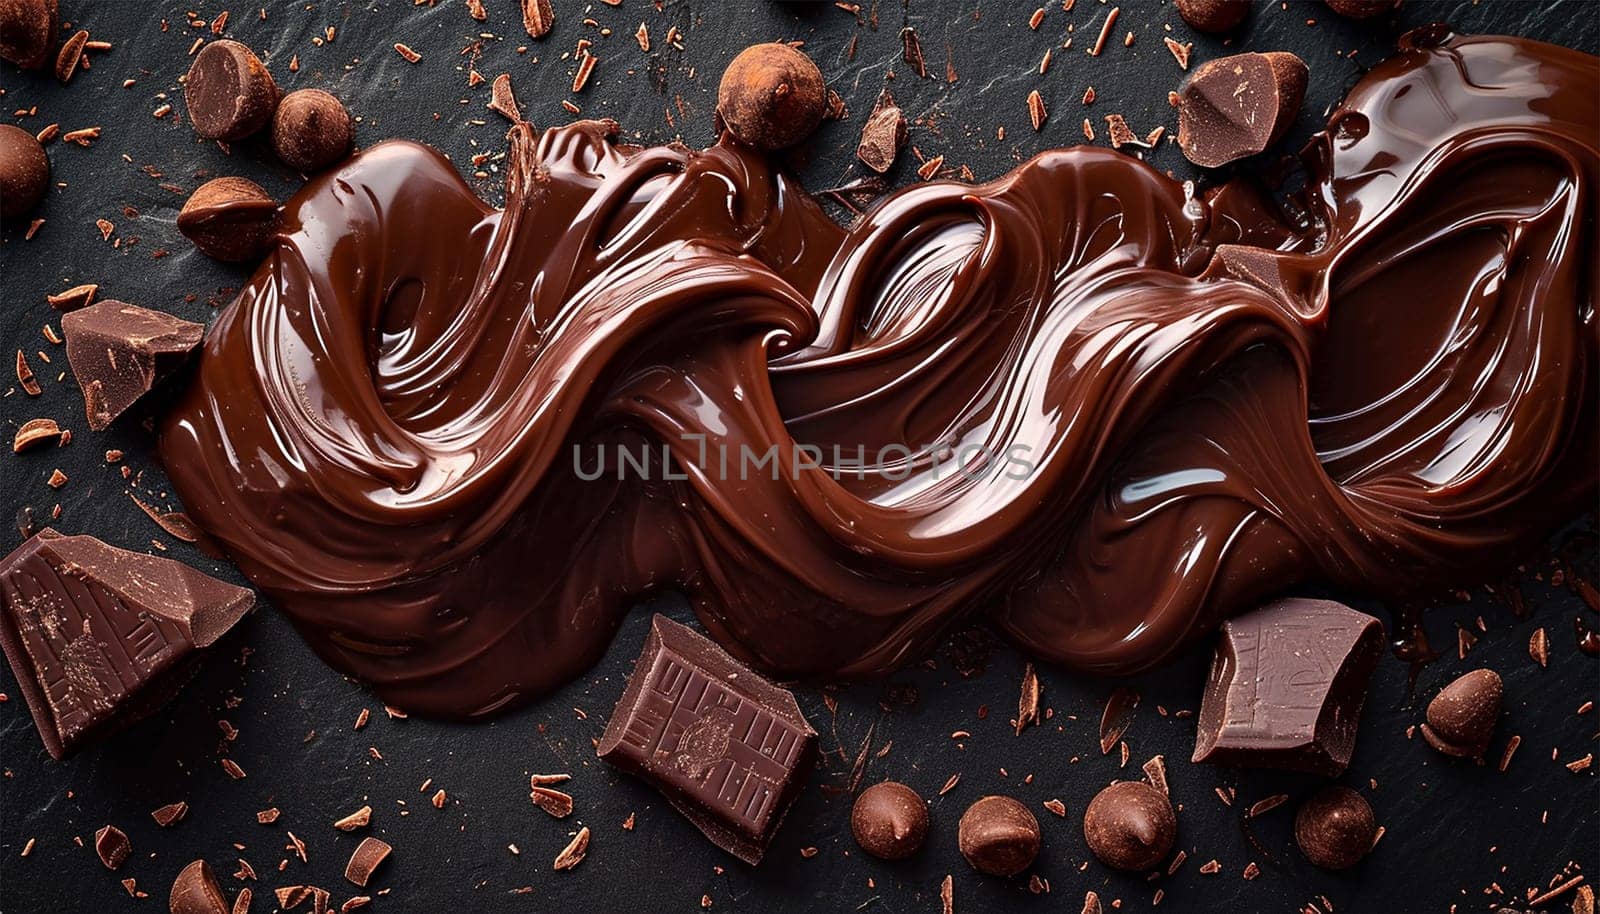 Stirring chocolate, hot melted liquid chocolate, mixing molten milk chocolate or dark caramel. Cooking handmade chocolate dessert and candies. Confectionery background texture flowing by Annebel146